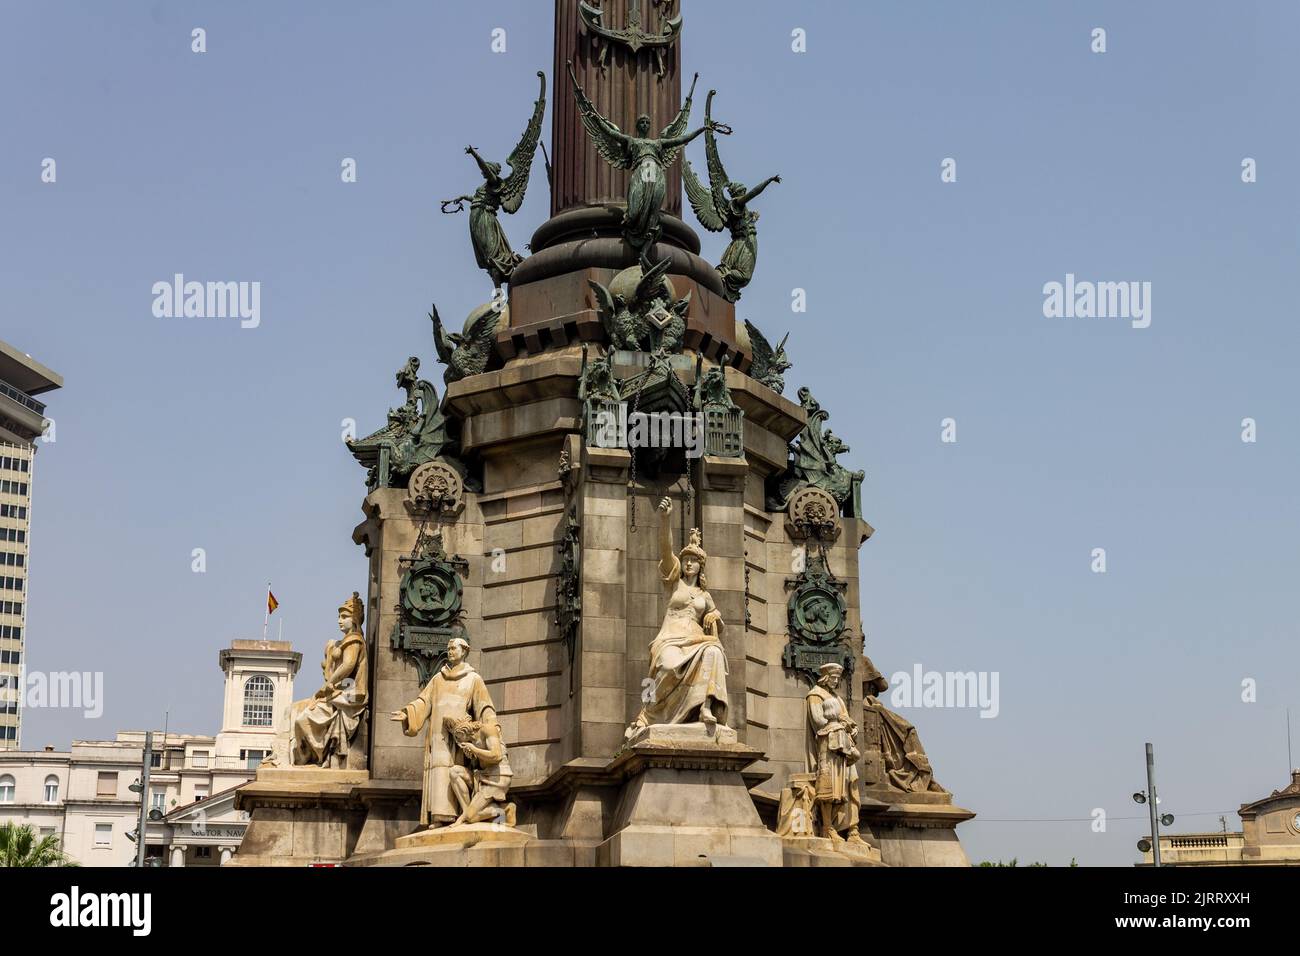 A low angle shot of the Colon (Columbus) monument in Barcelona, Spain Stock Photo